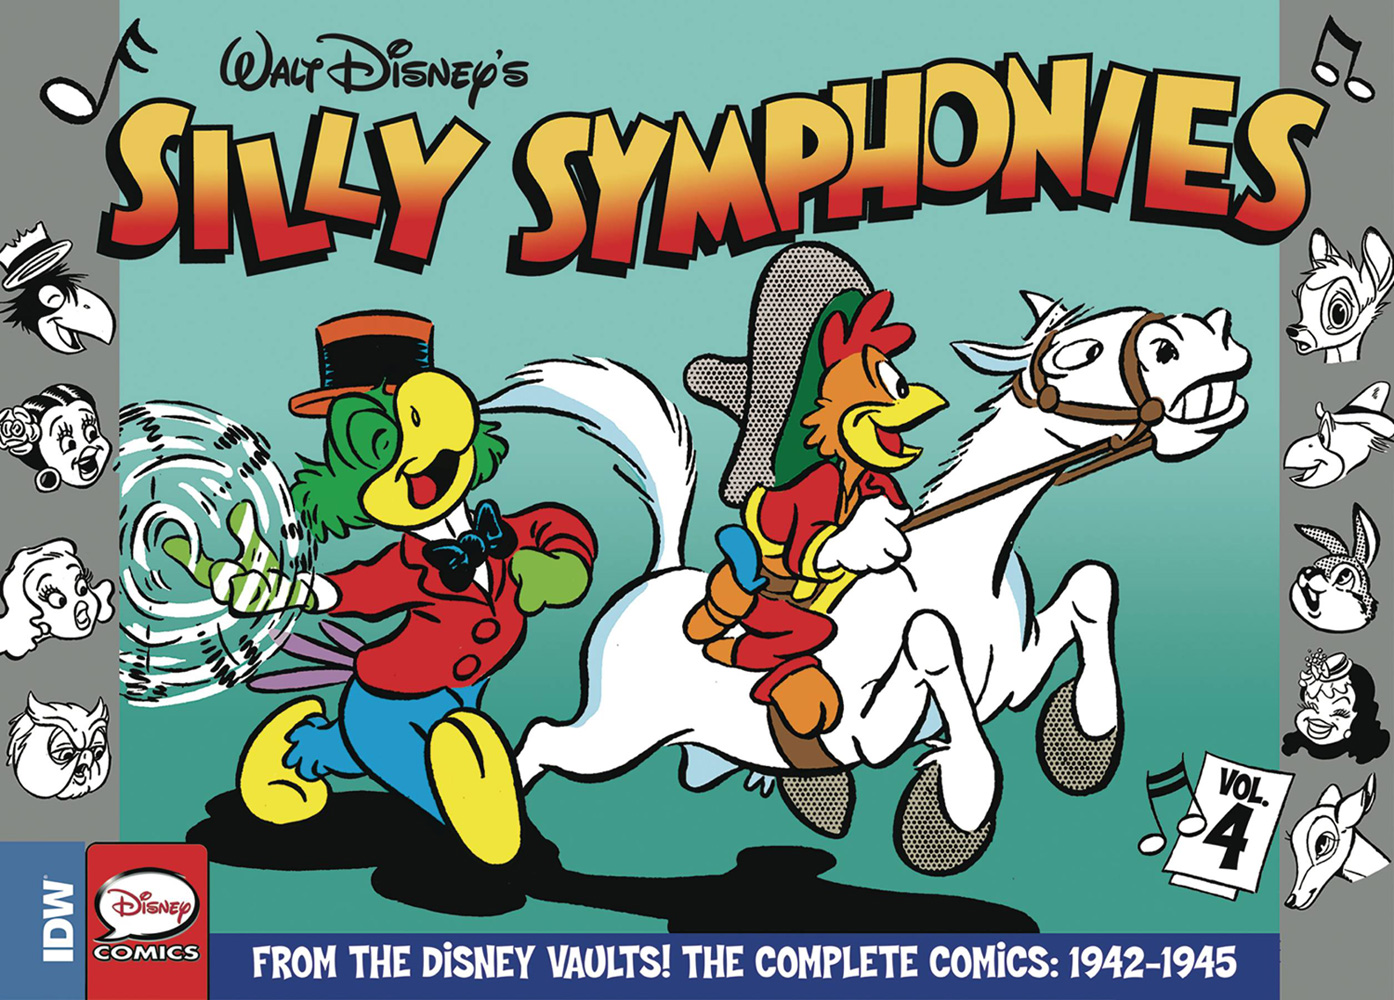 Silly Symphonies Vol. 4: The Complete Comics 1942-1945